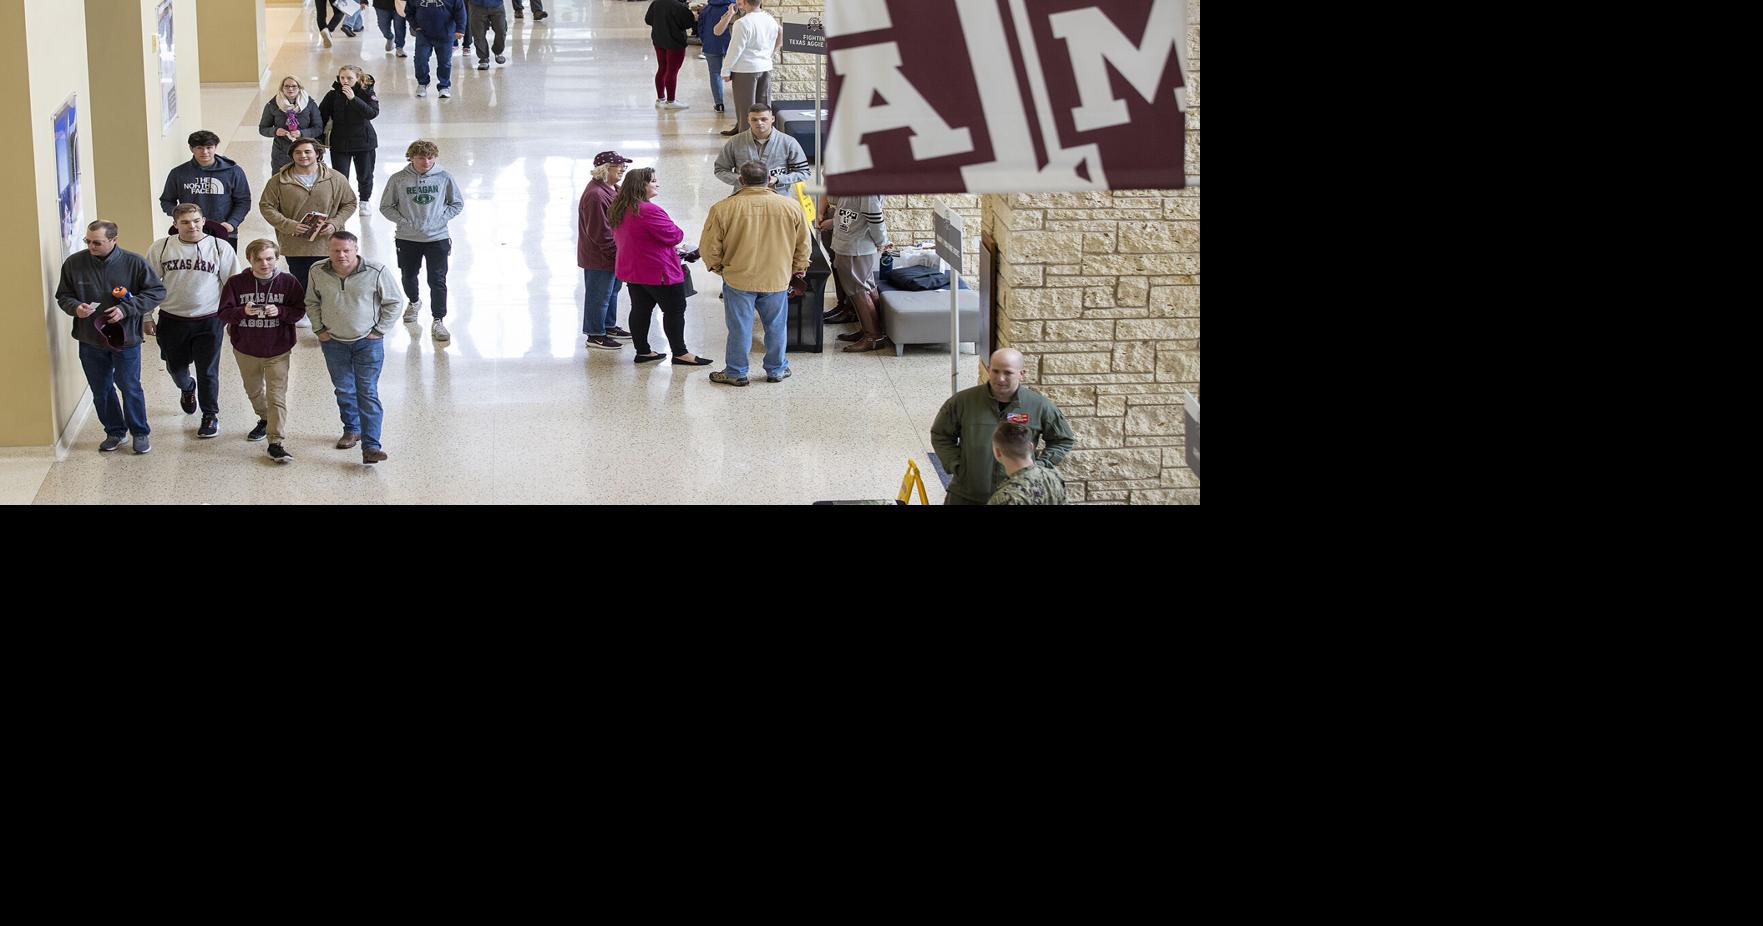 Texas A&M University - Profile, Rankings and Data